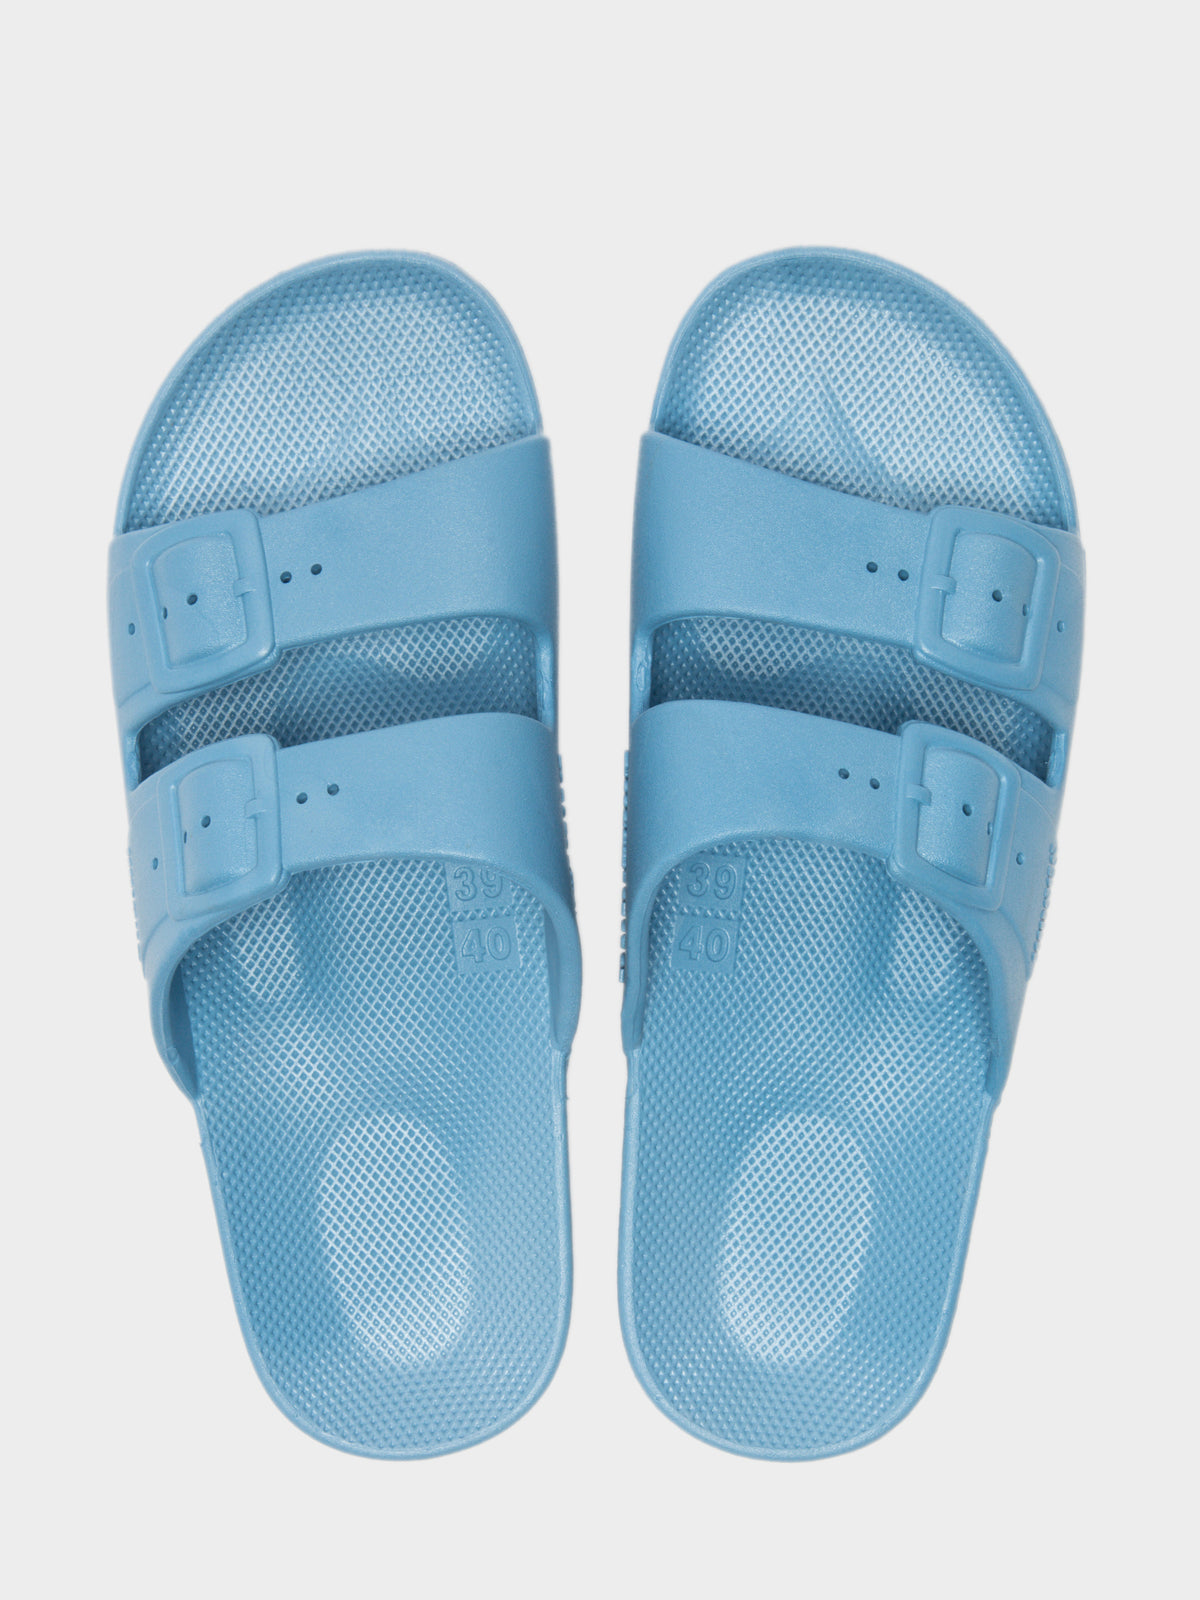 Unisex Freedom Moses Slides in Lagoon Blue